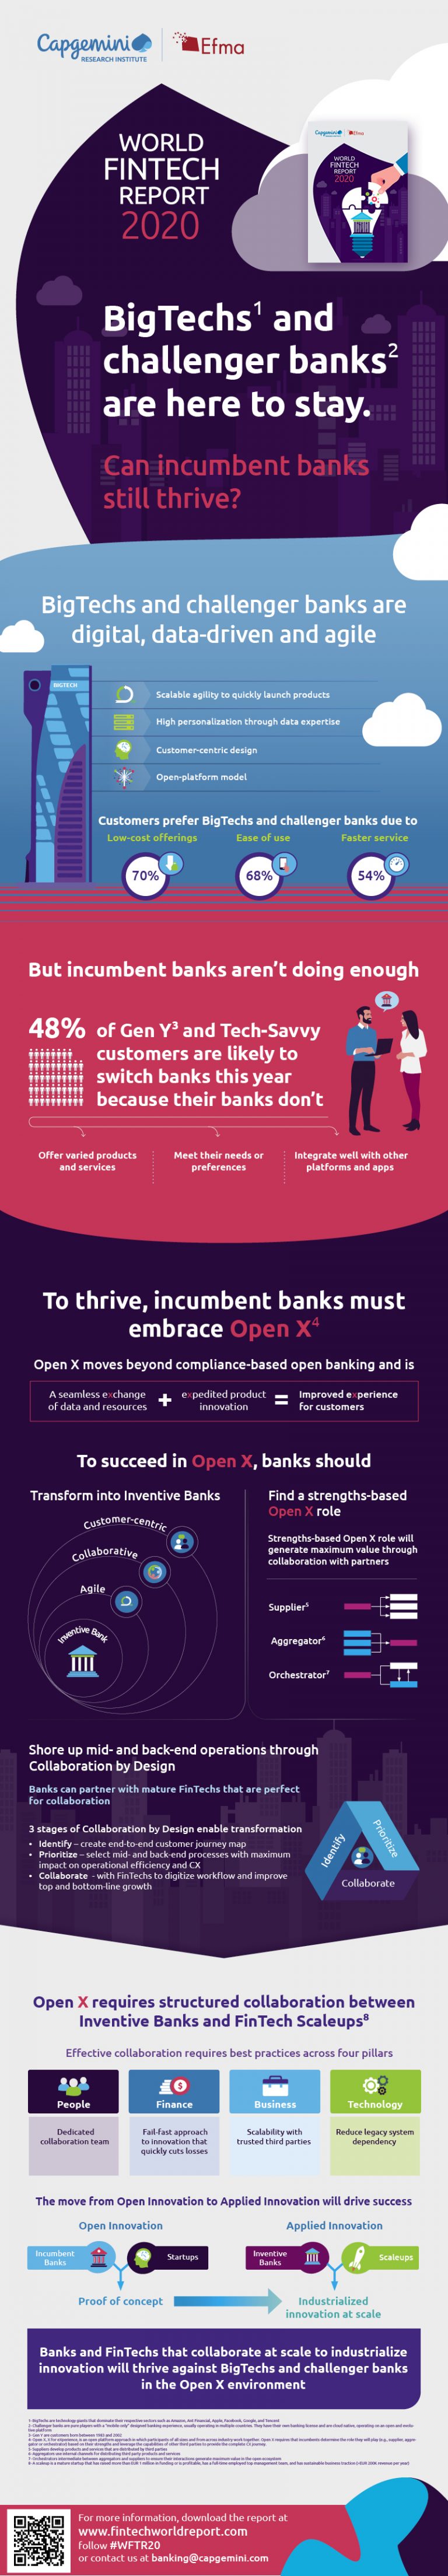 Overview of The World Fintech Report 2020 by Capgemini (Infographic)